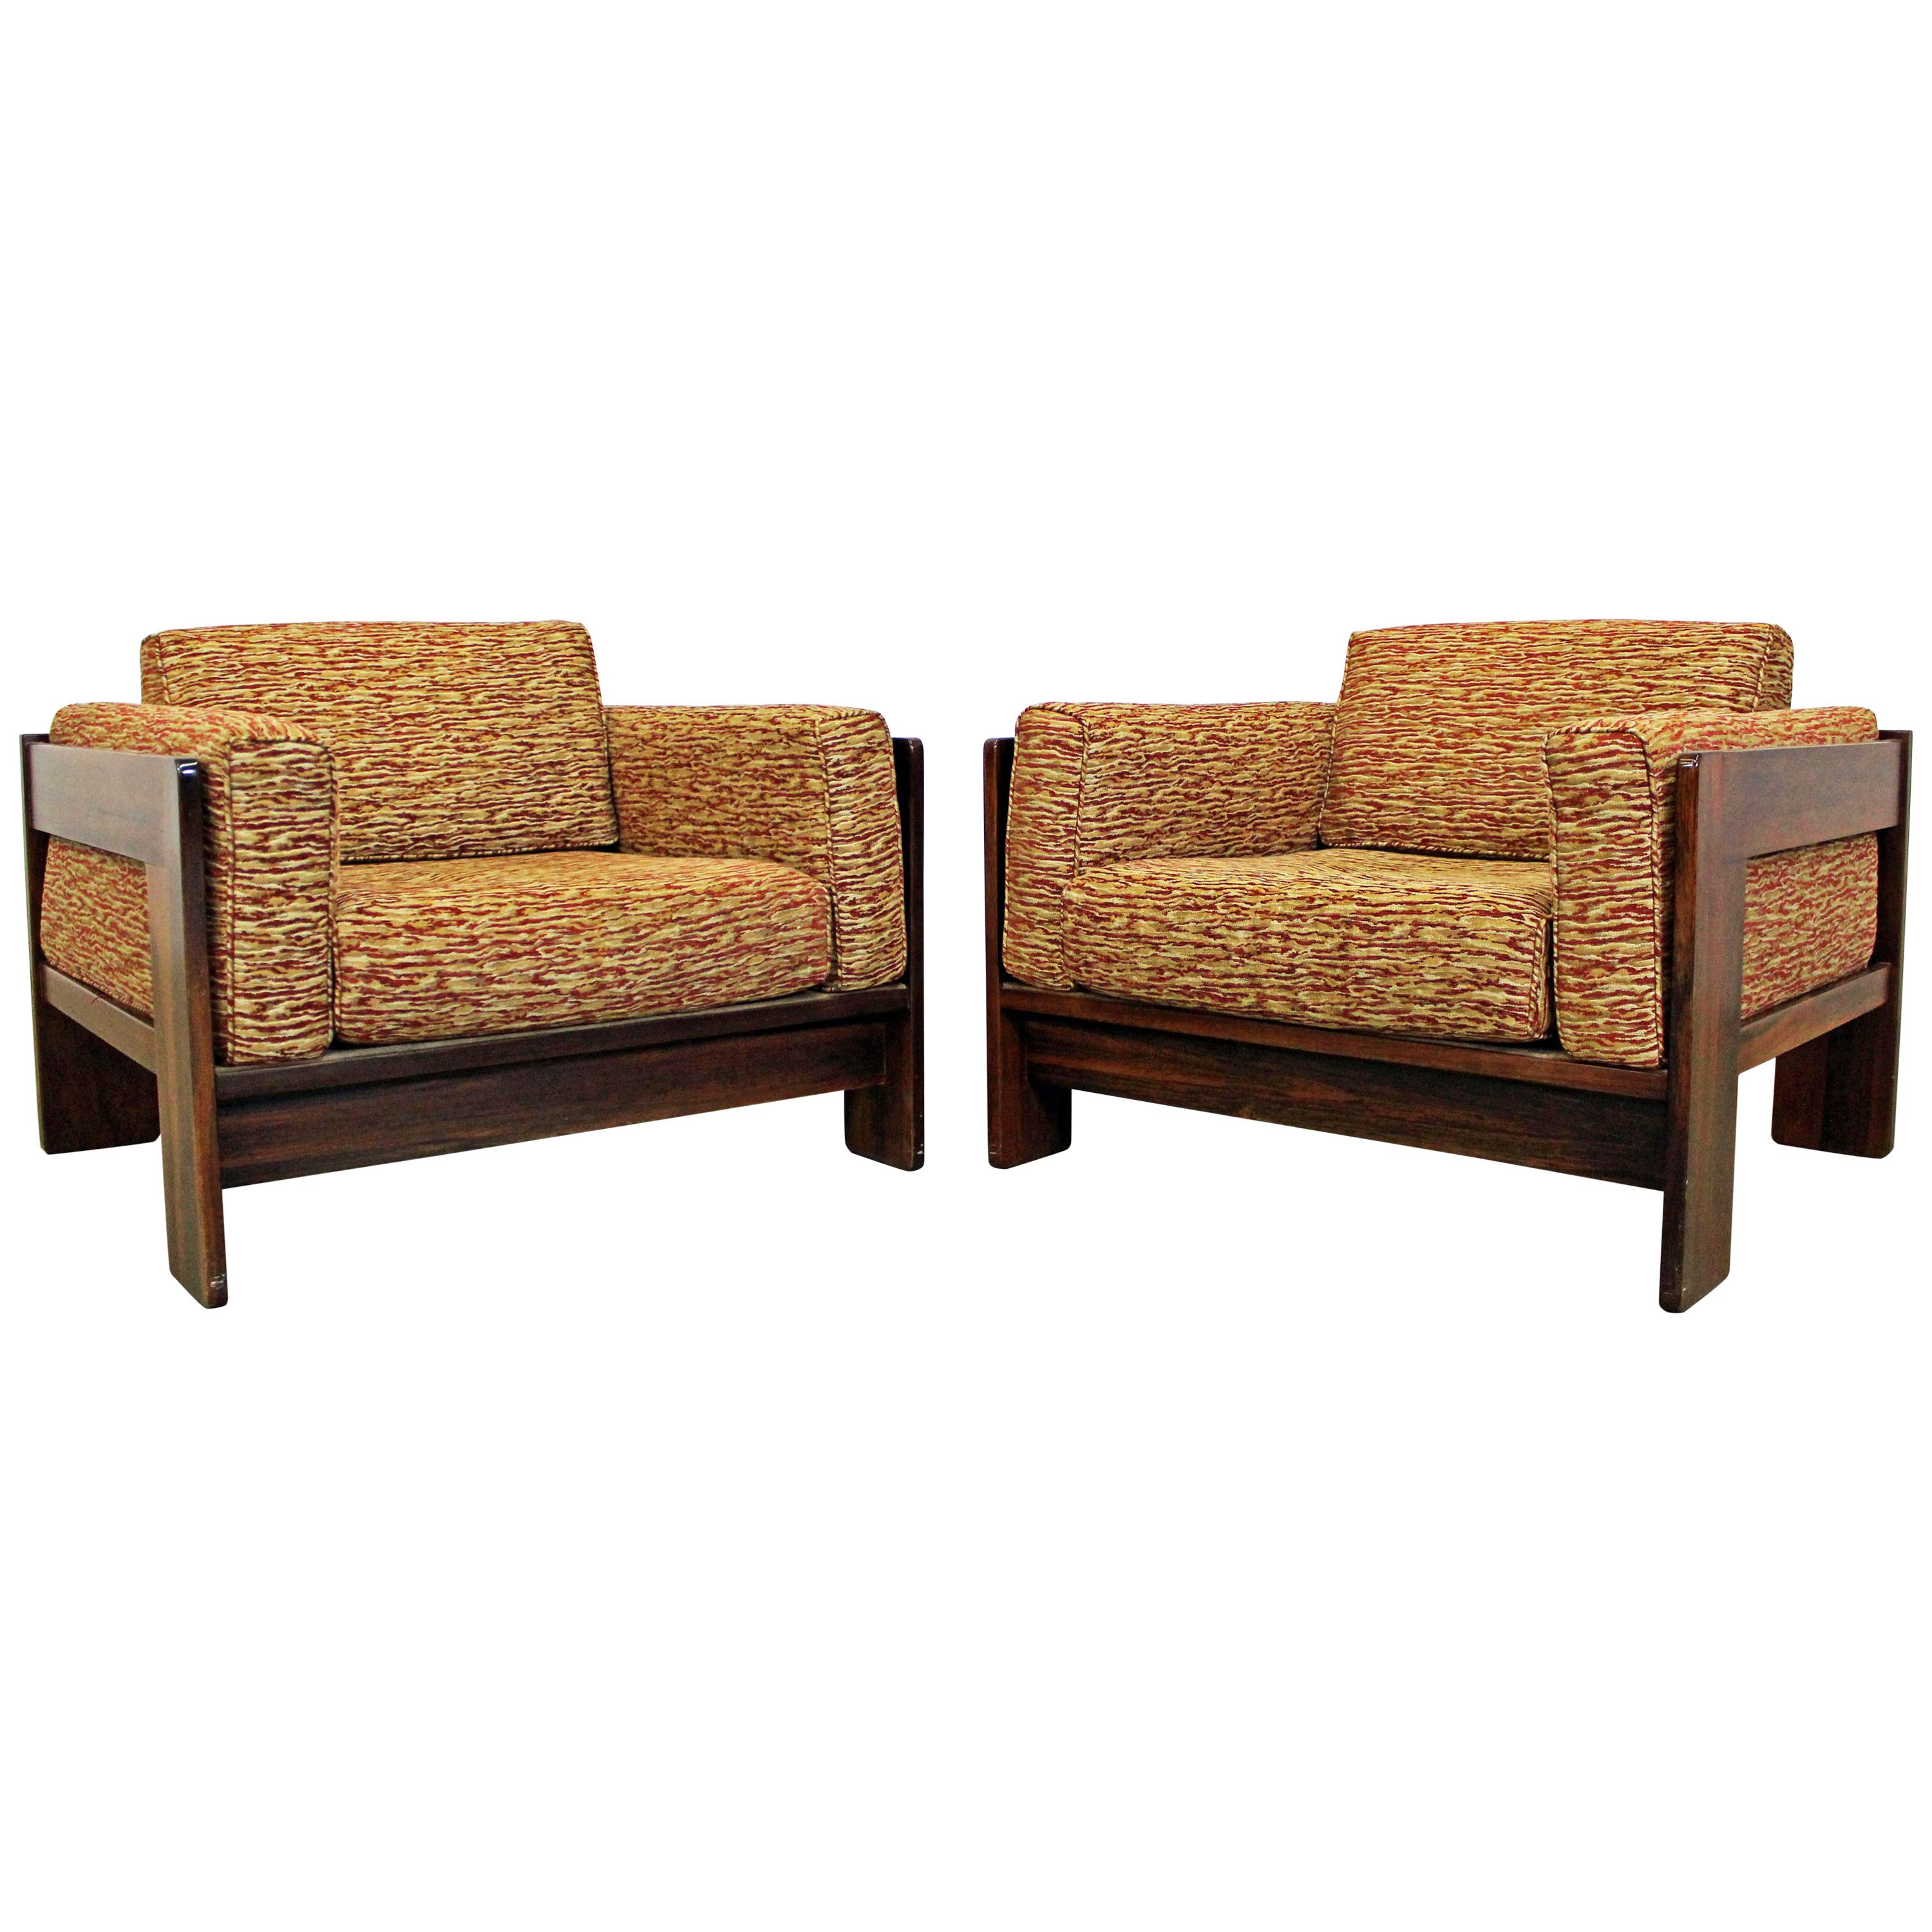 Pair of Mid-Century Modern Bastiano Rosewood Knoll Club Chairs